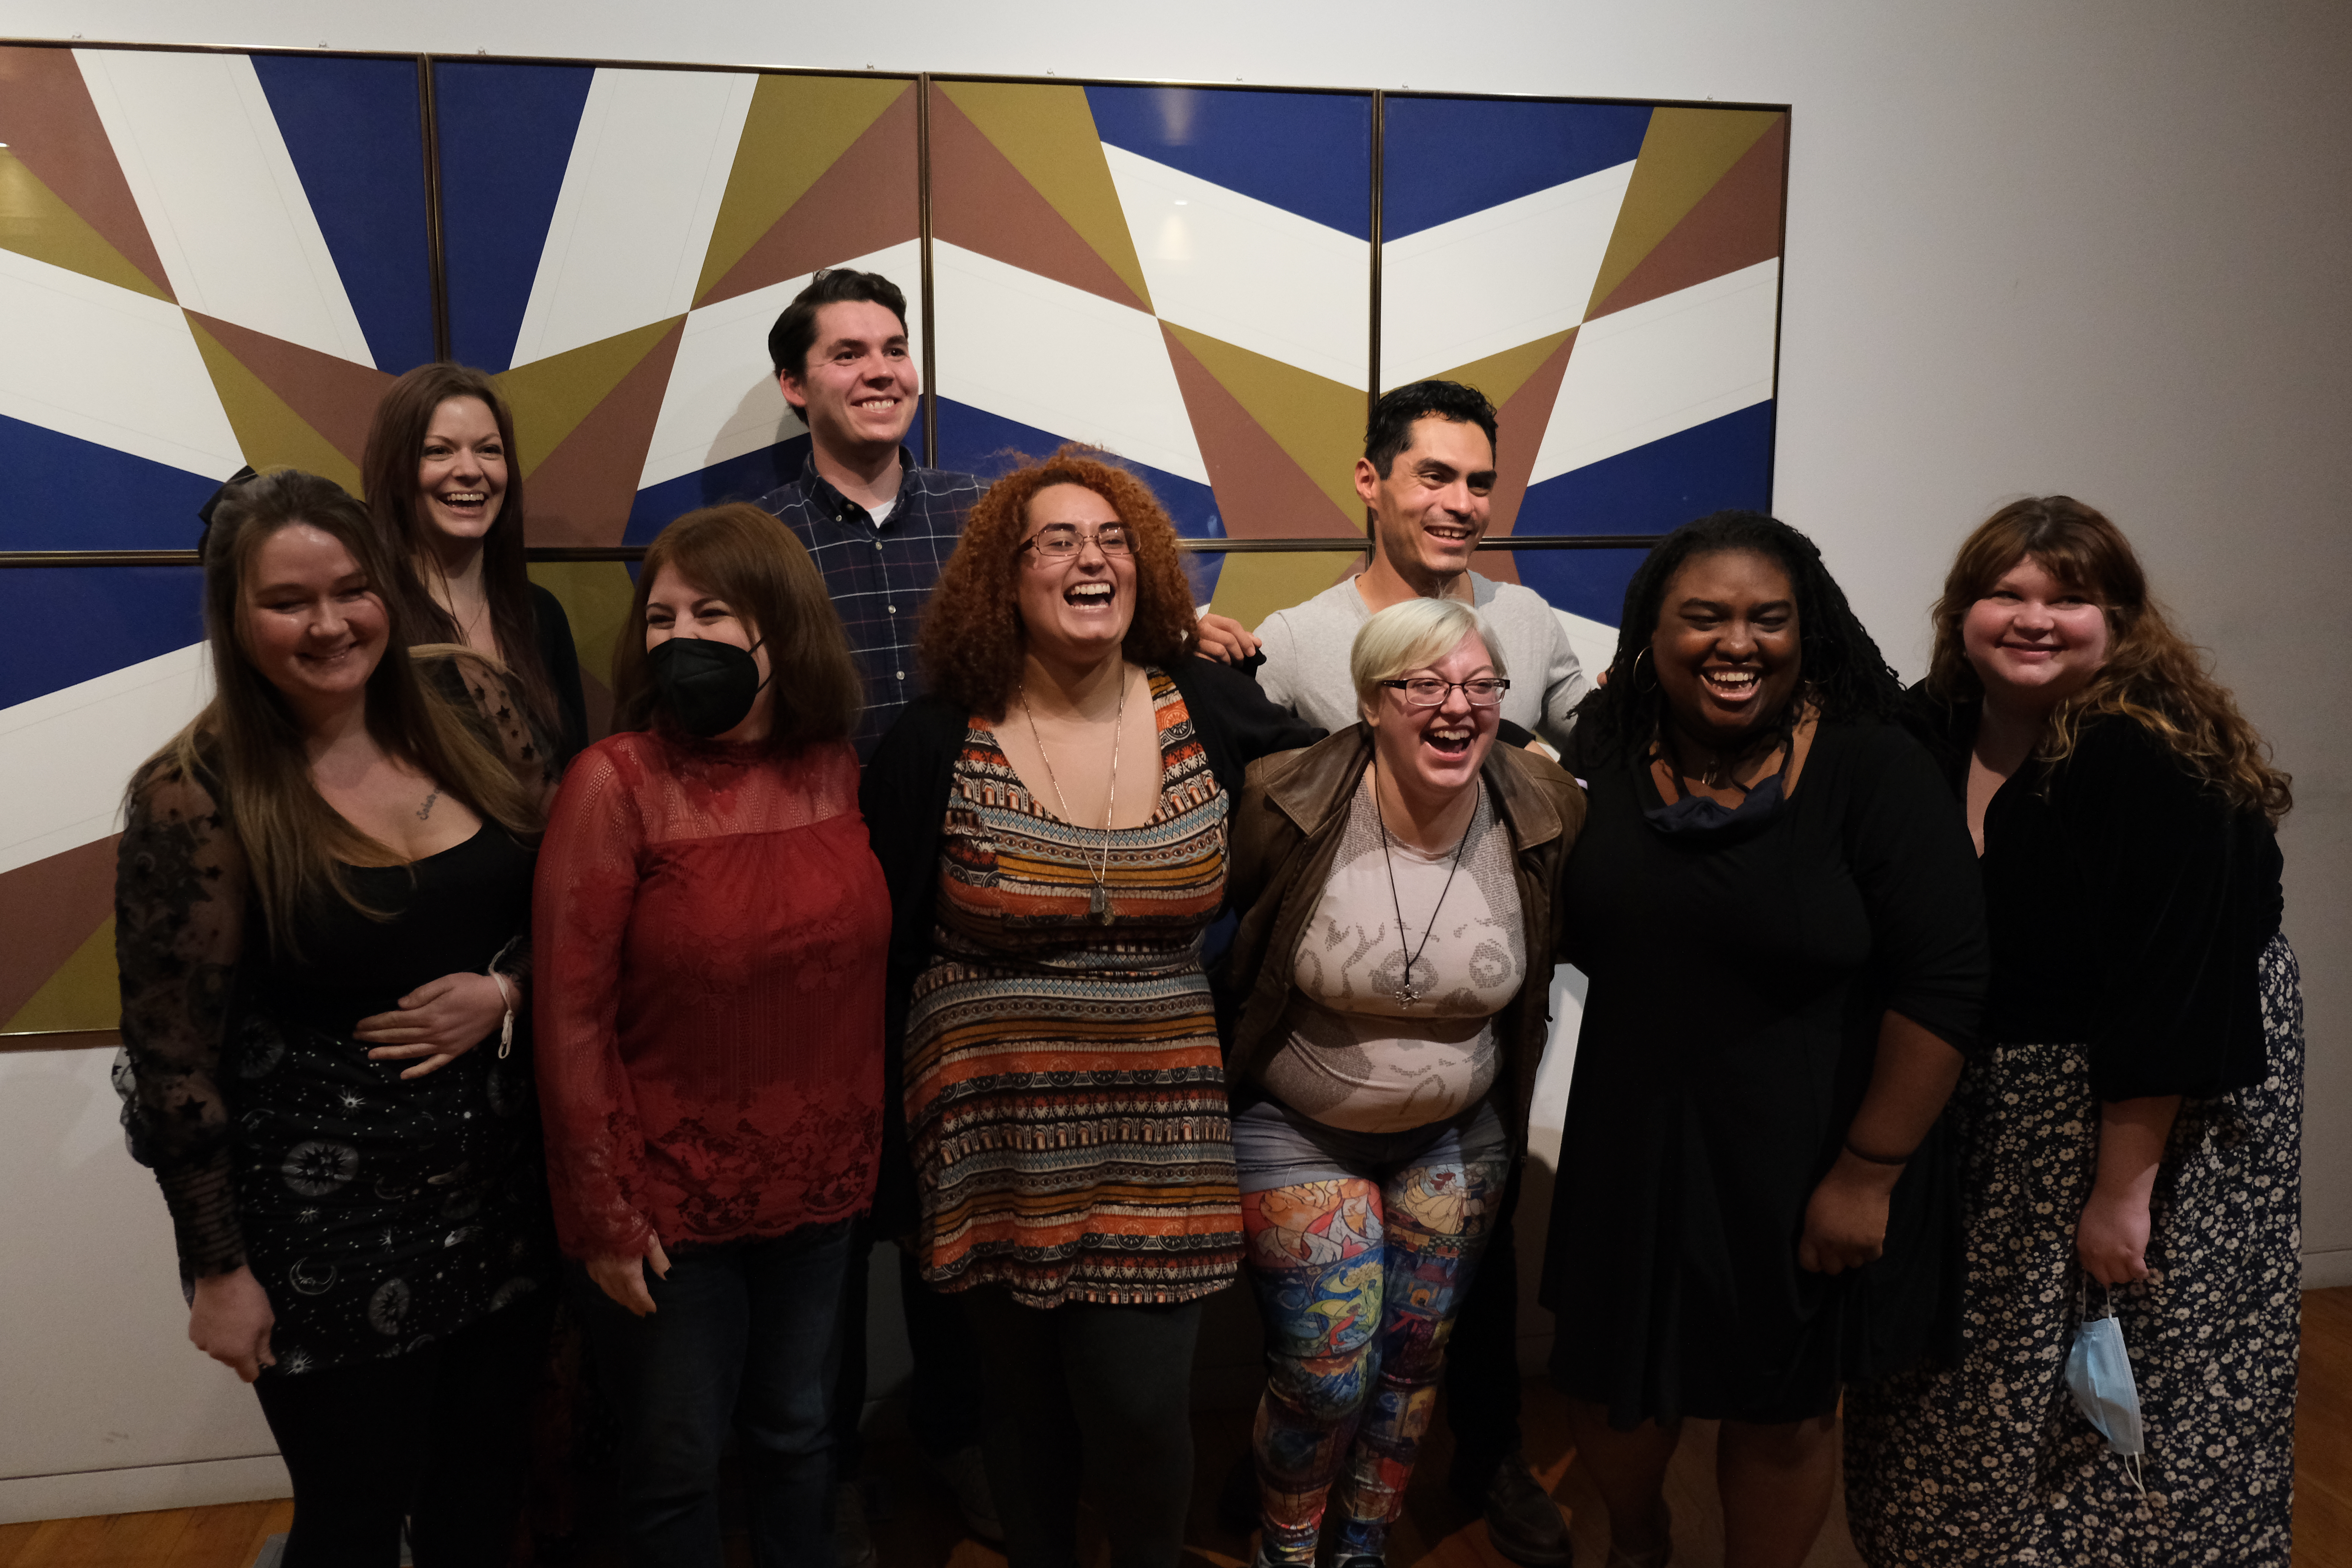 Nine MFA students standing in front of geometric art